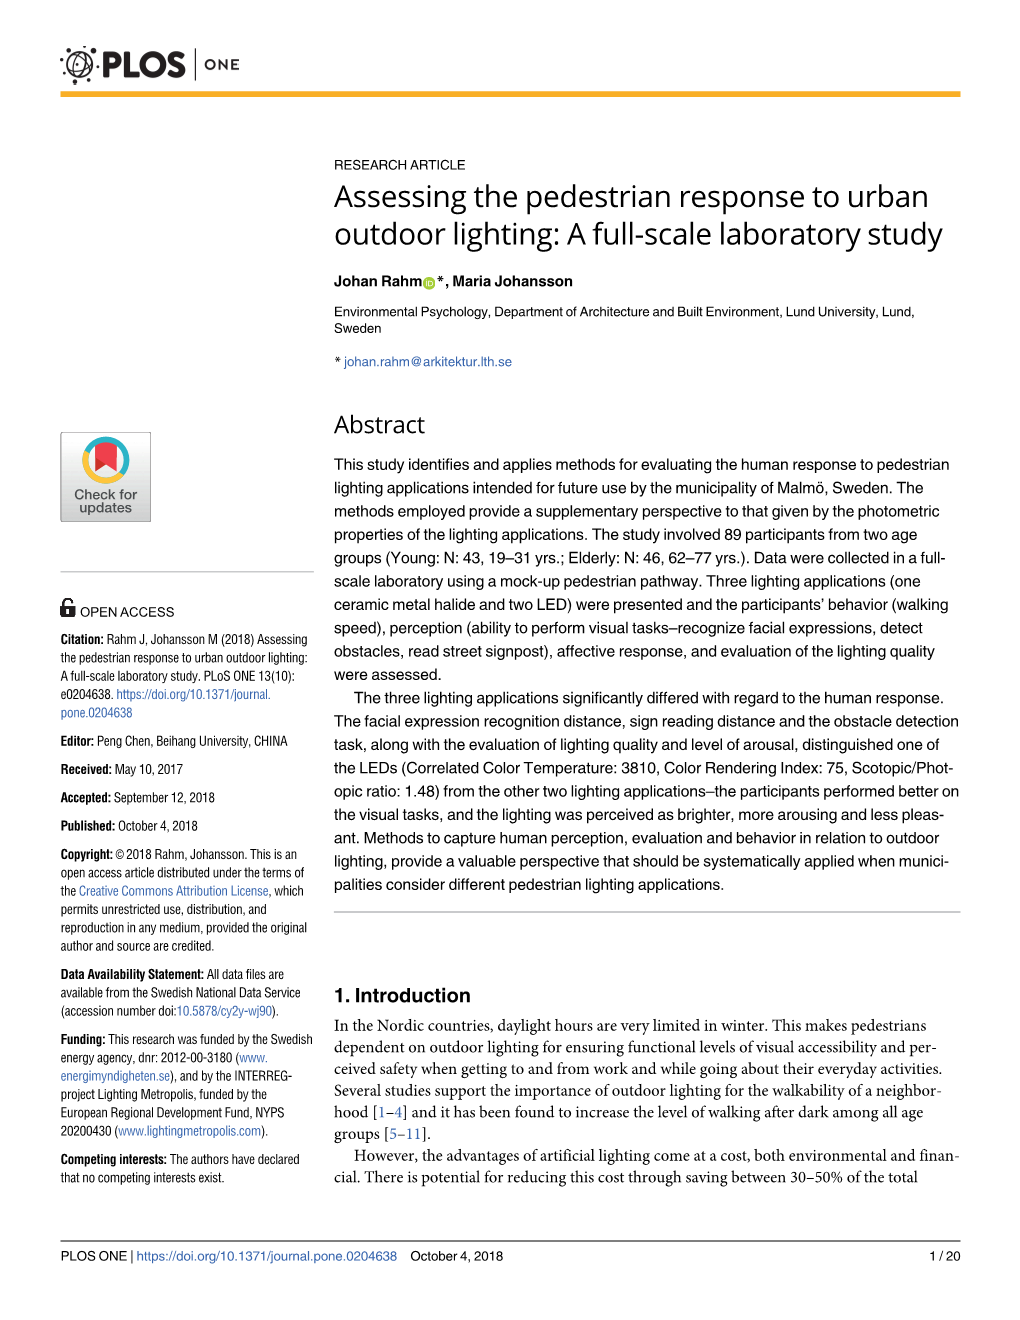 Assessing the Pedestrian Response to Urban Outdoor Lighting: a Full-Scale Laboratory Study